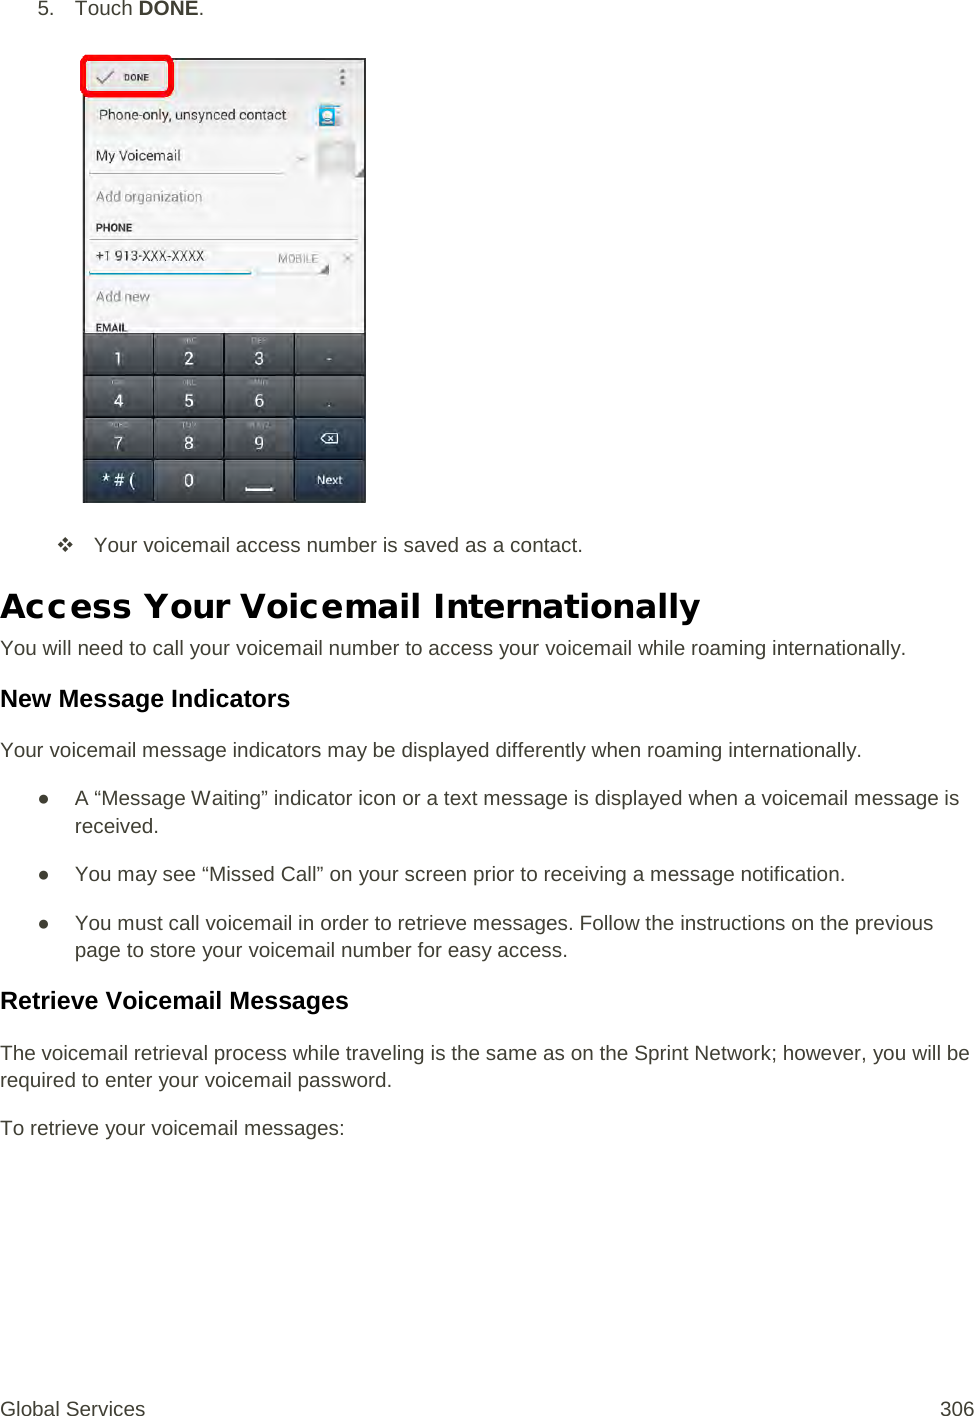 5. Touch DONE.    Your voicemail access number is saved as a contact. Access Your Voicemail Internationally You will need to call your voicemail number to access your voicemail while roaming internationally. New Message Indicators Your voicemail message indicators may be displayed differently when roaming internationally. ● A “Message Waiting” indicator icon or a text message is displayed when a voicemail message is received.  ● You may see “Missed Call” on your screen prior to receiving a message notification. ● You must call voicemail in order to retrieve messages. Follow the instructions on the previous page to store your voicemail number for easy access. Retrieve Voicemail Messages The voicemail retrieval process while traveling is the same as on the Sprint Network; however, you will be required to enter your voicemail password. To retrieve your voicemail messages:  Global Services 306 